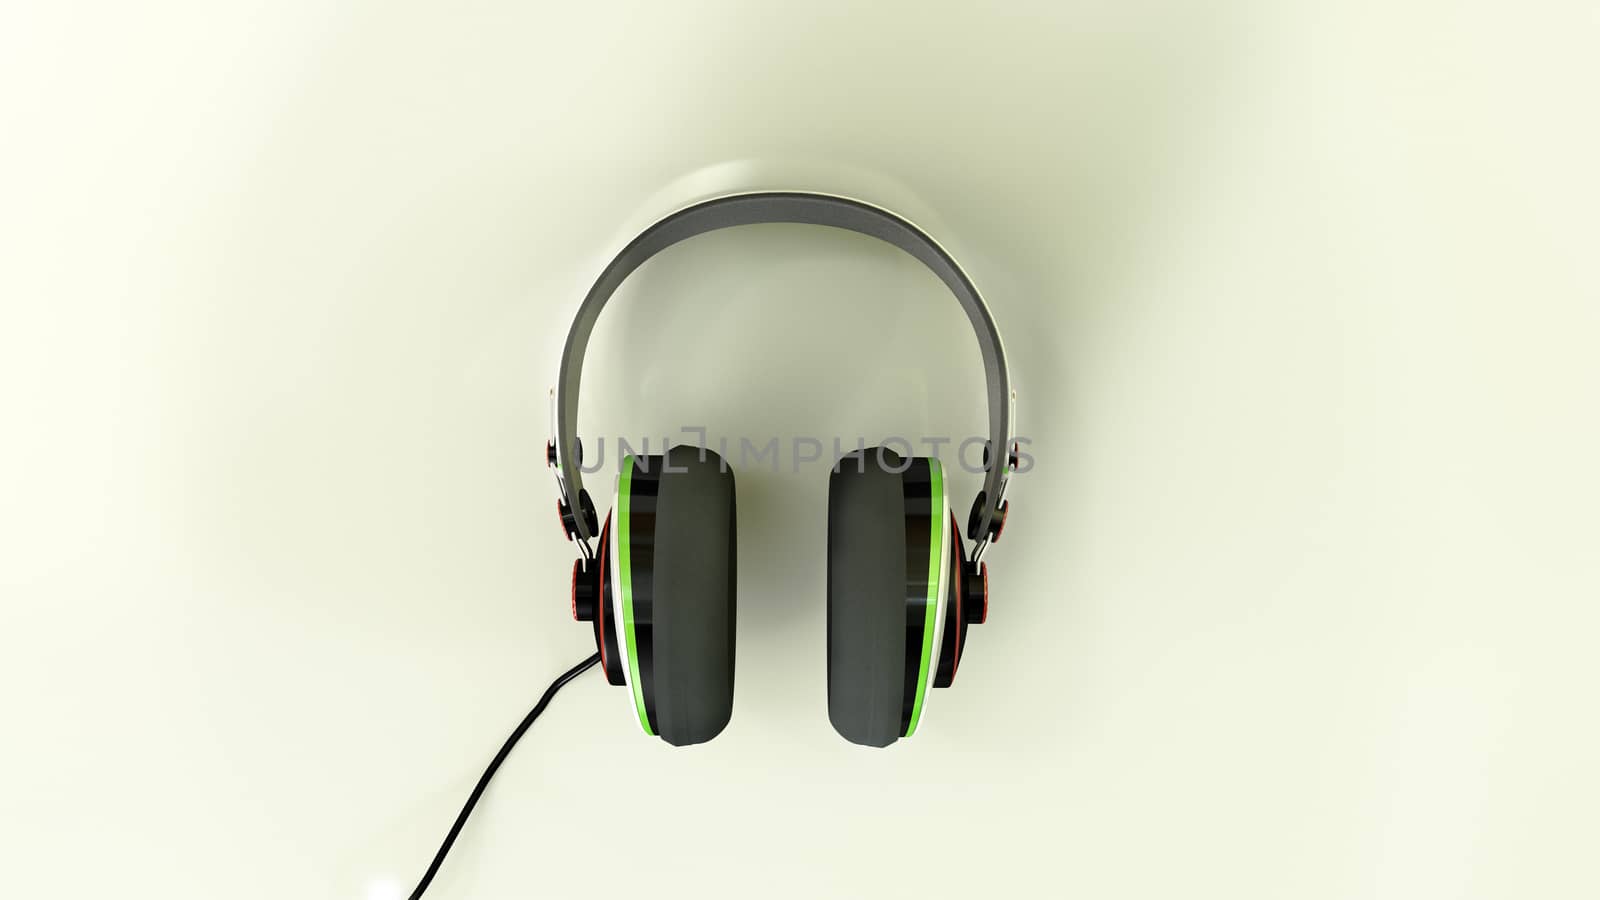 Headphones on a refelctive white surface by stockbp